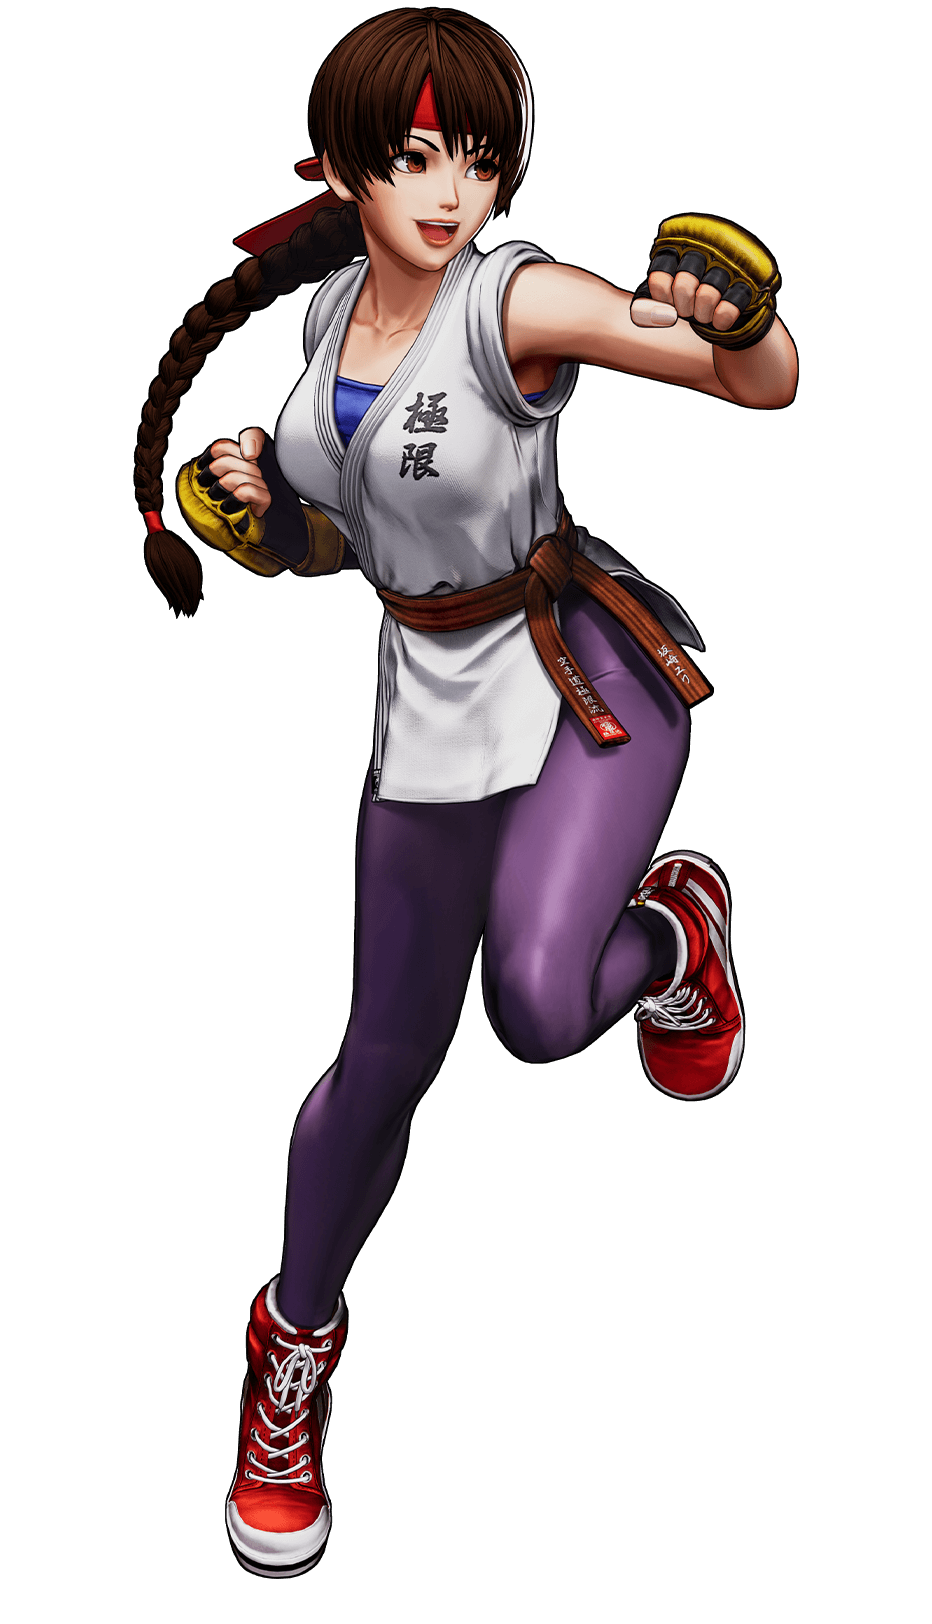 Premium AI Image  The king of fighters anime character